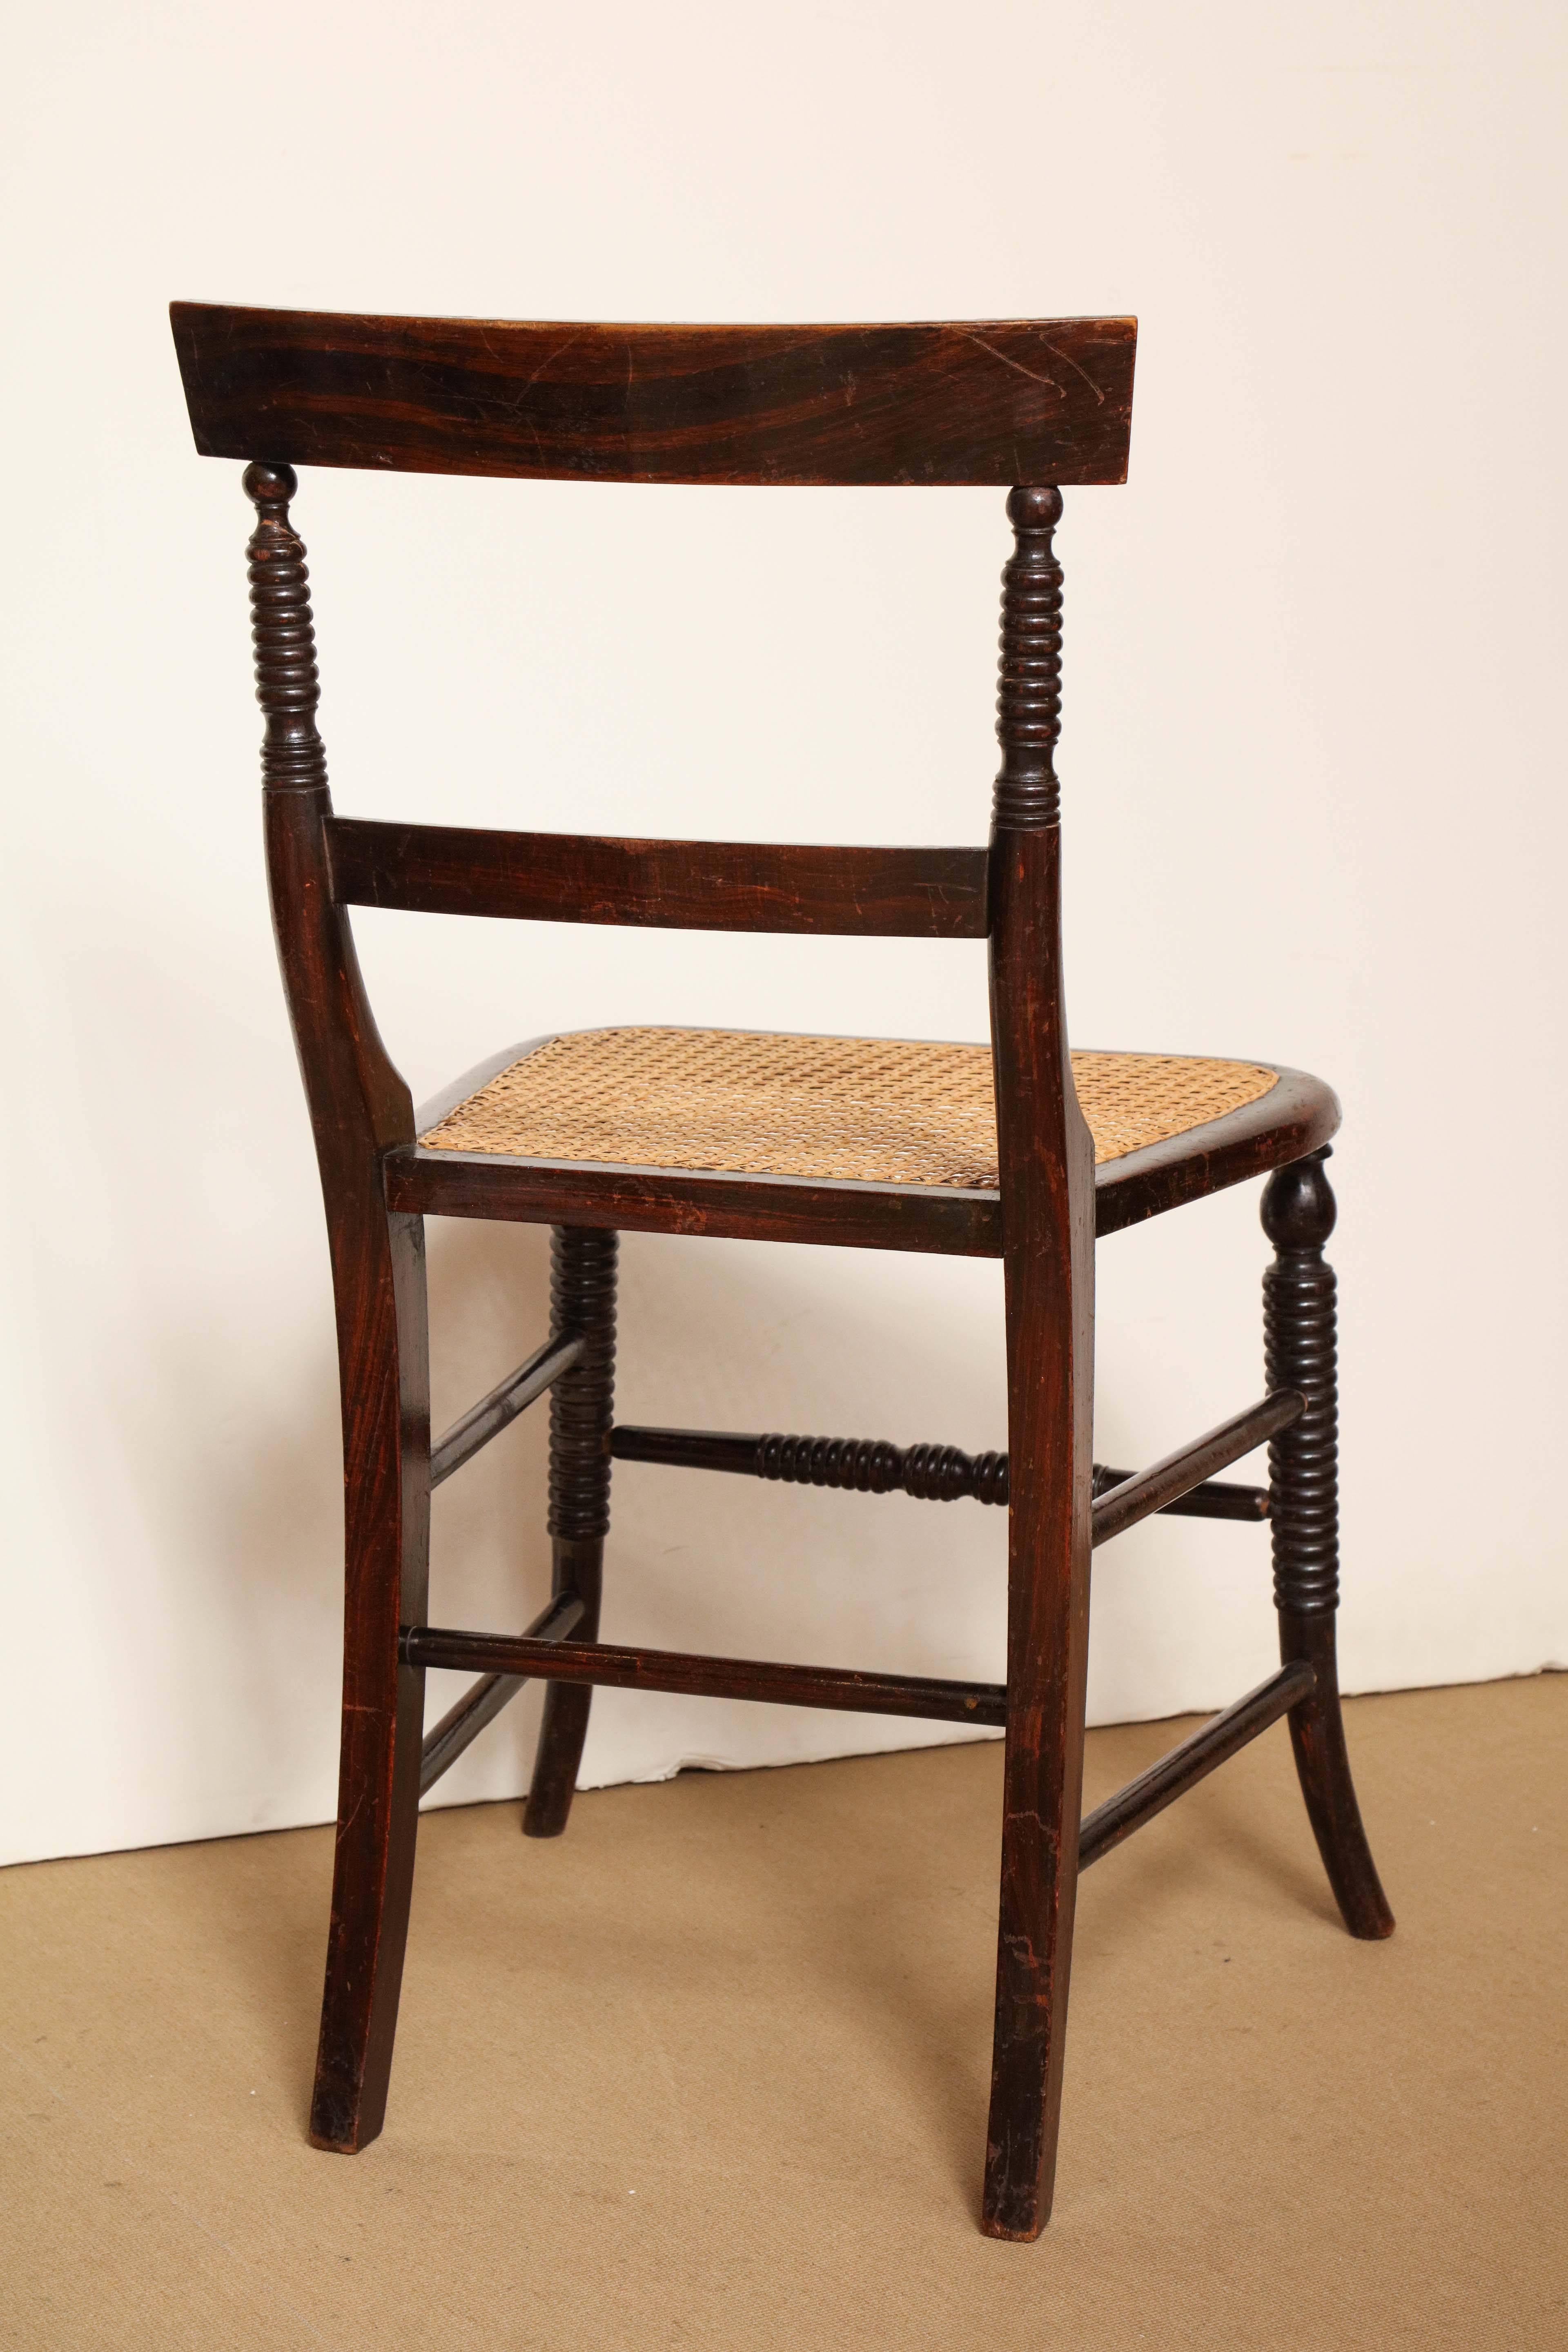 Early 19th Century English Regency Faux Rosewood Caned Chair 5